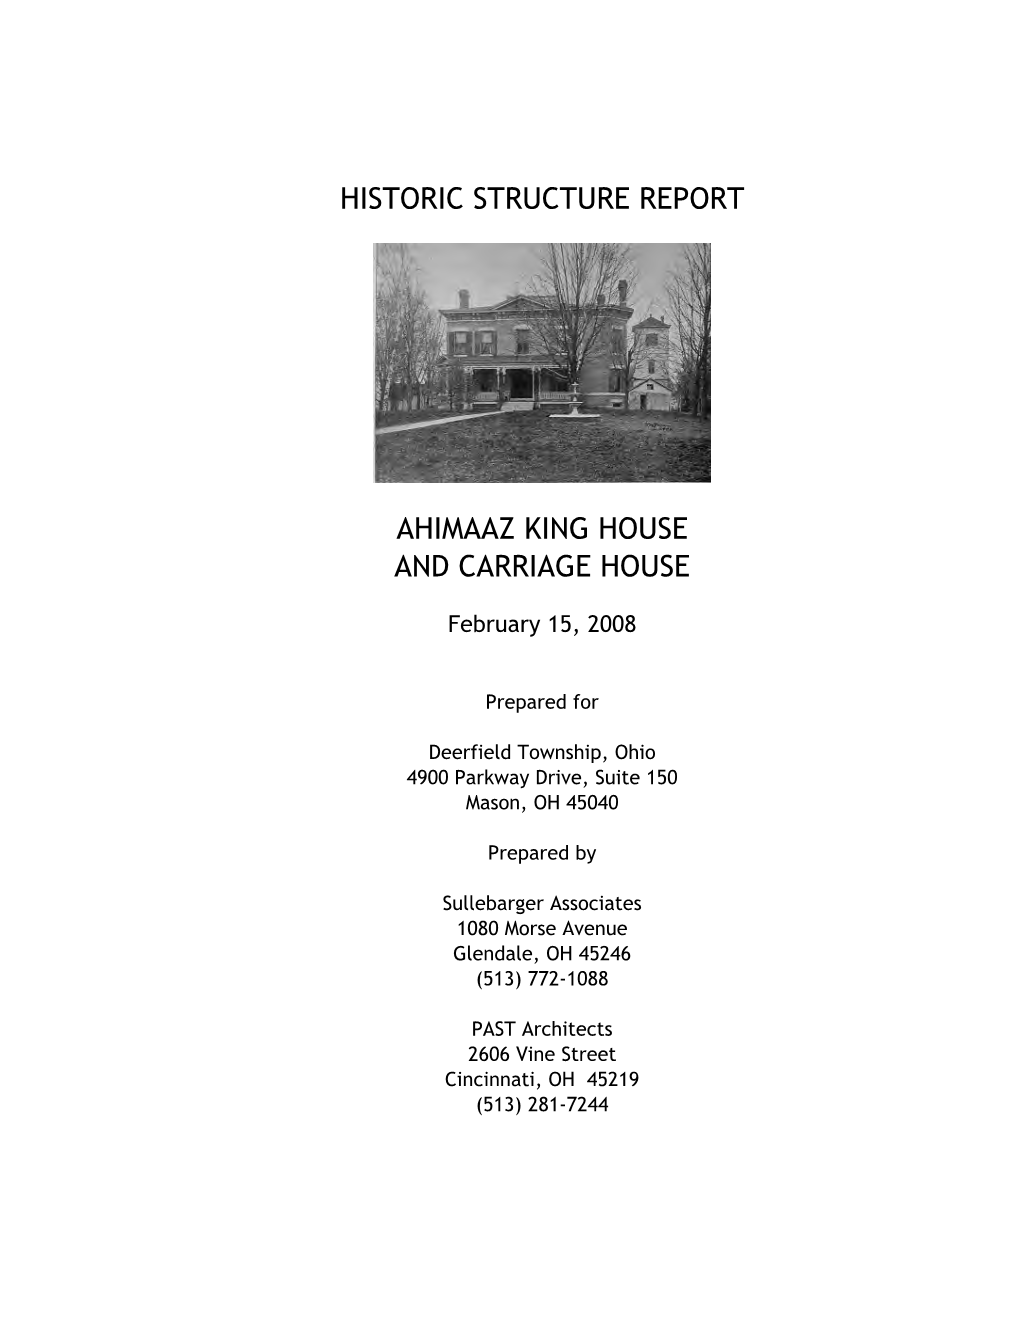 Historic Structure Report Ahimaaz King House and Carriage House